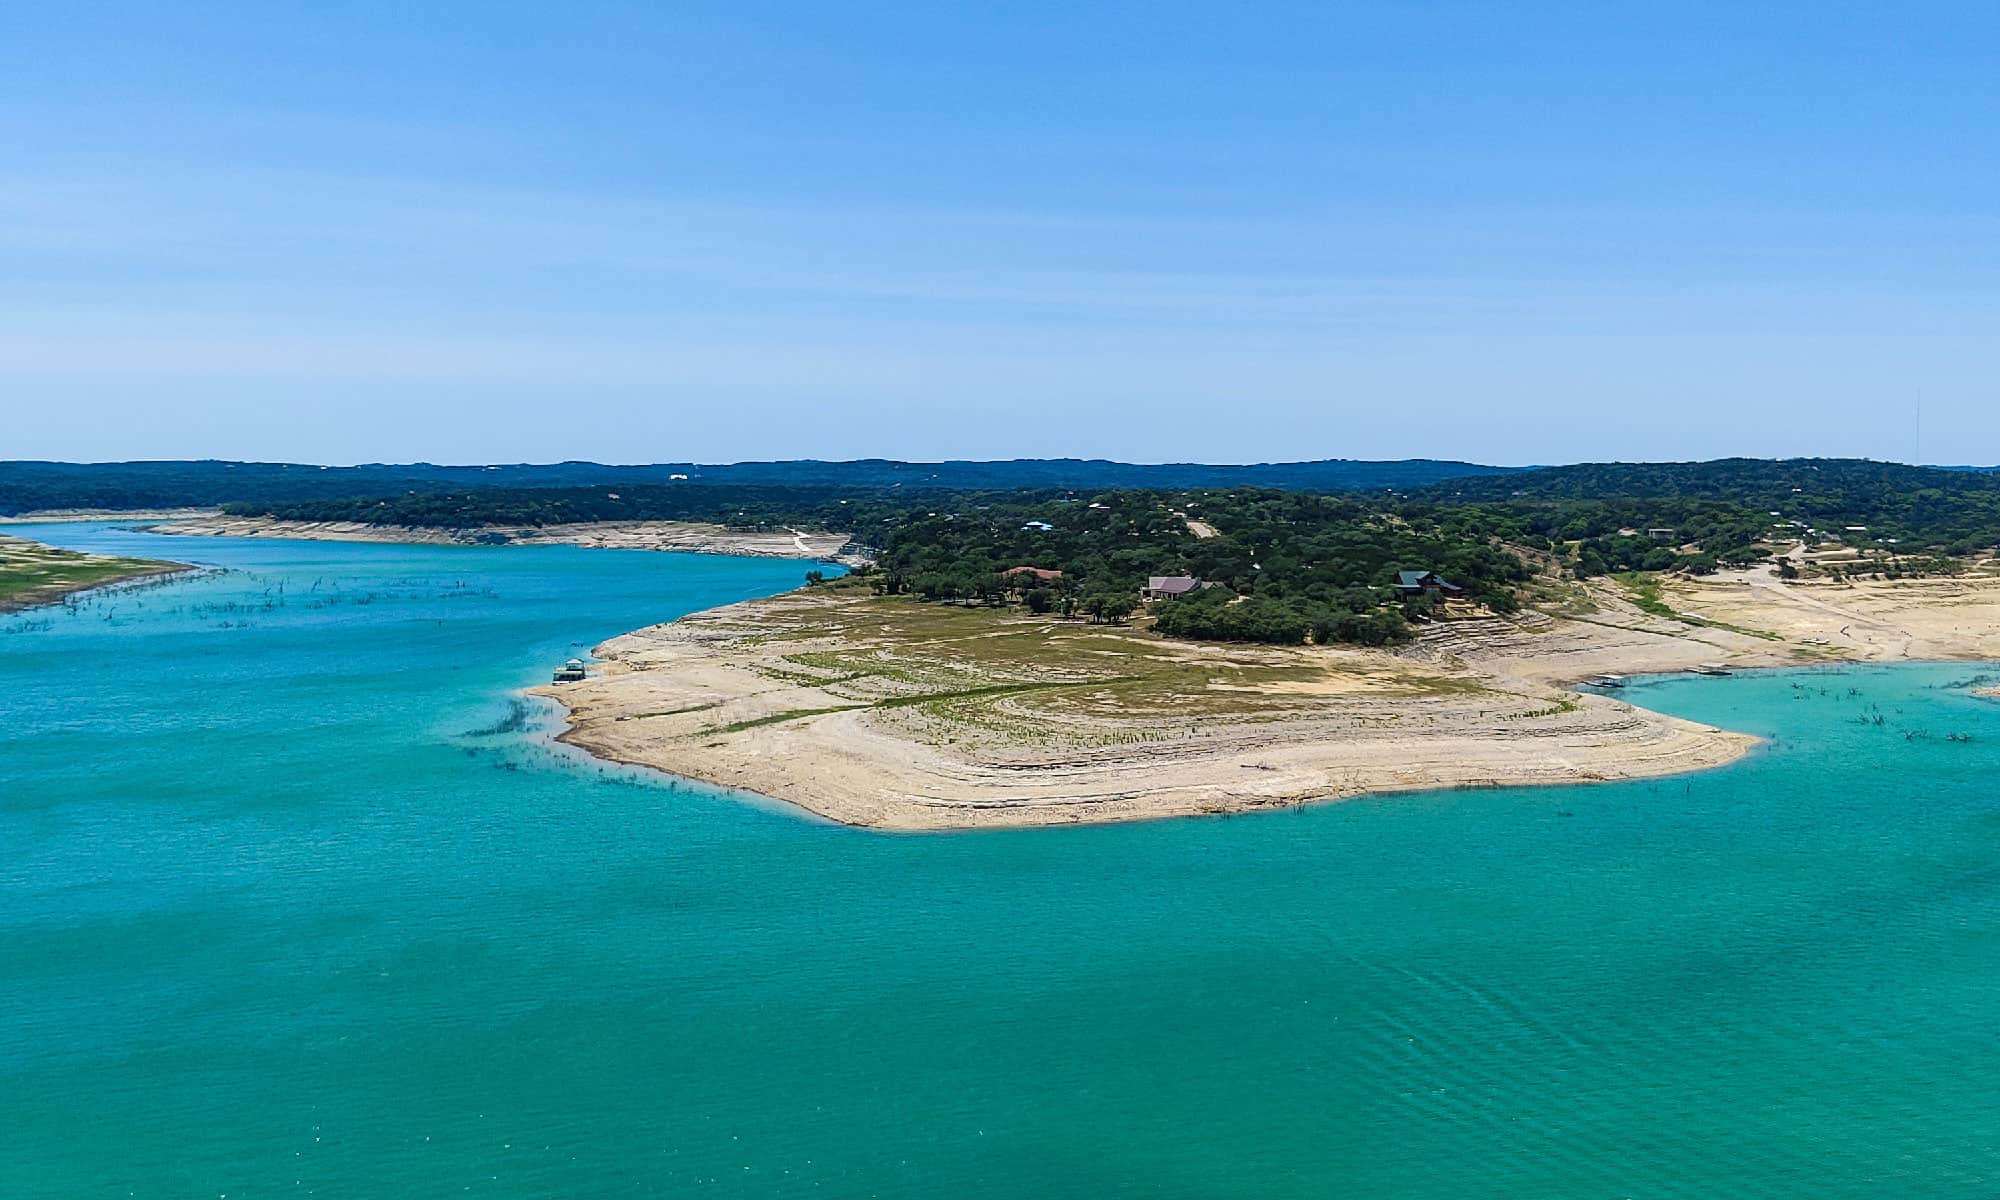 7 Places In Texas With The Most Amazing Clear Blue Water - Narcity